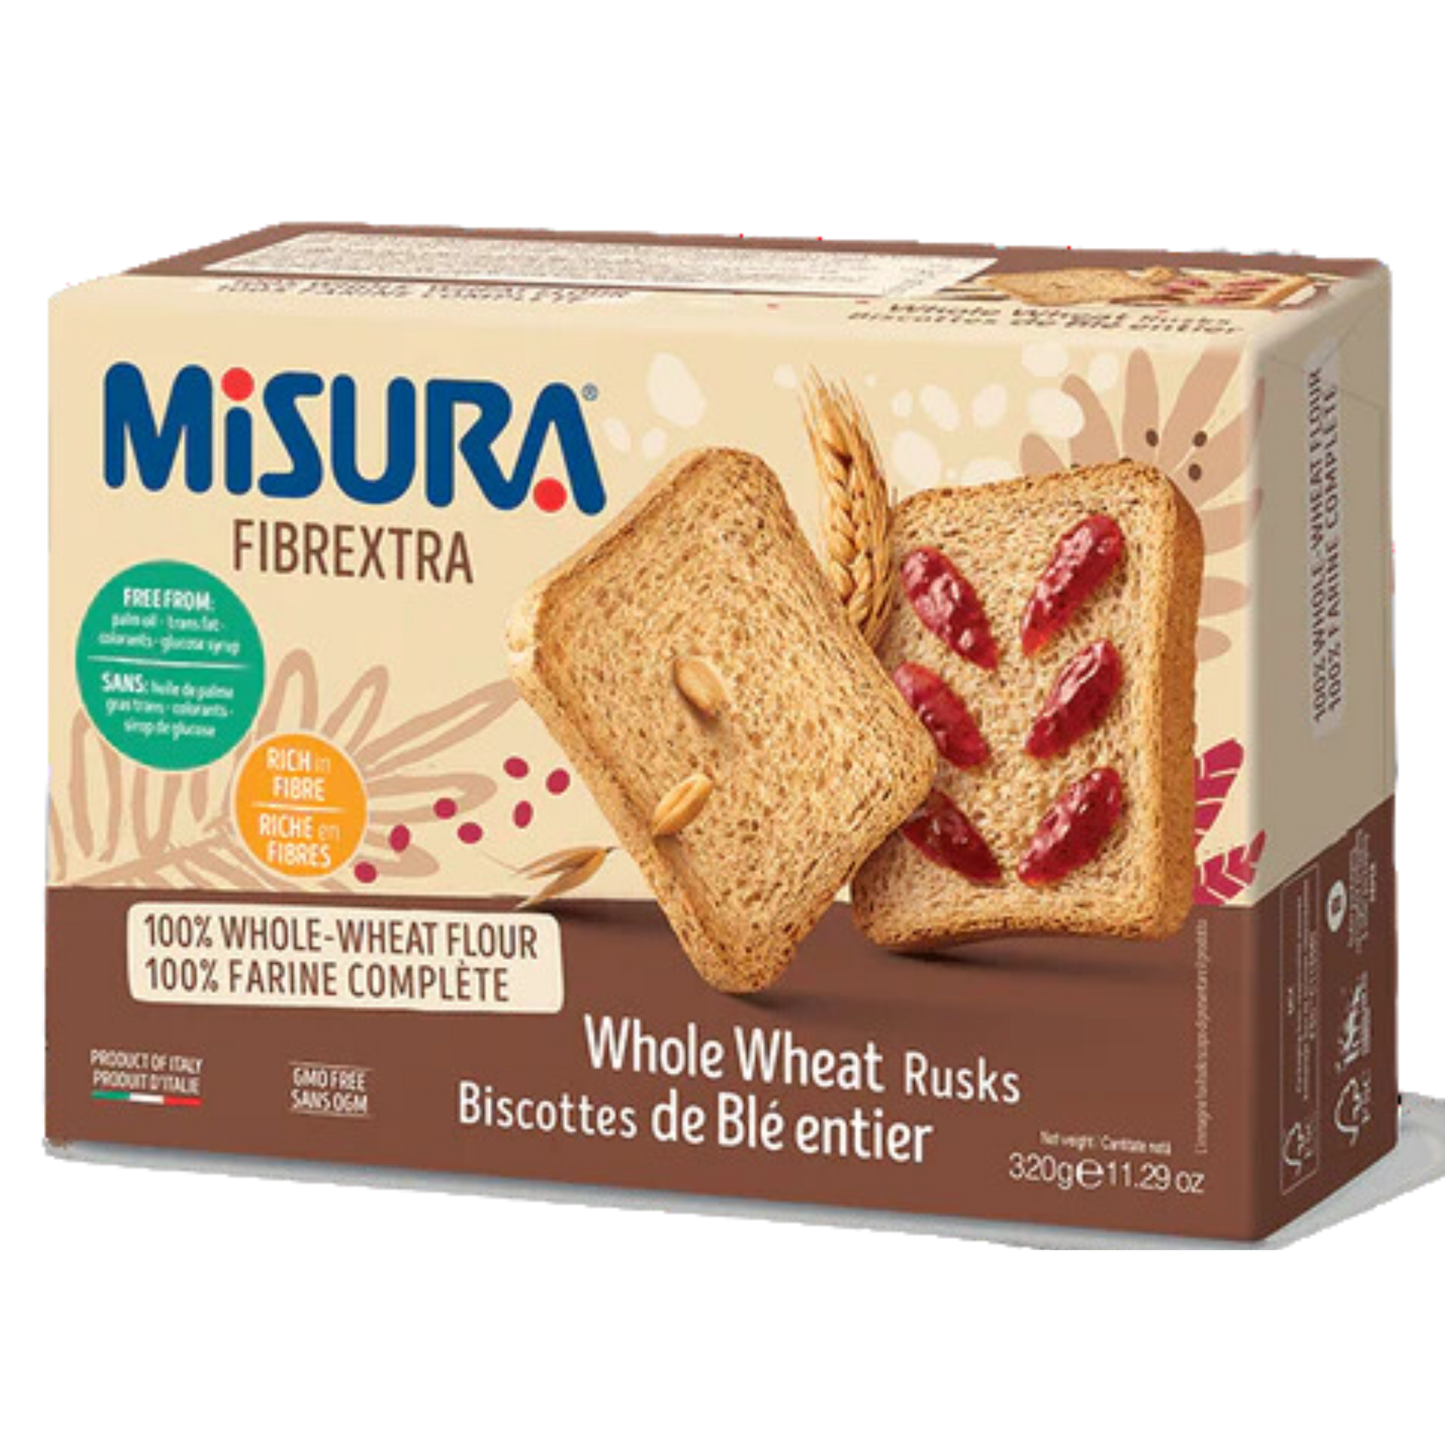 Whole Wheat Rusks 320g